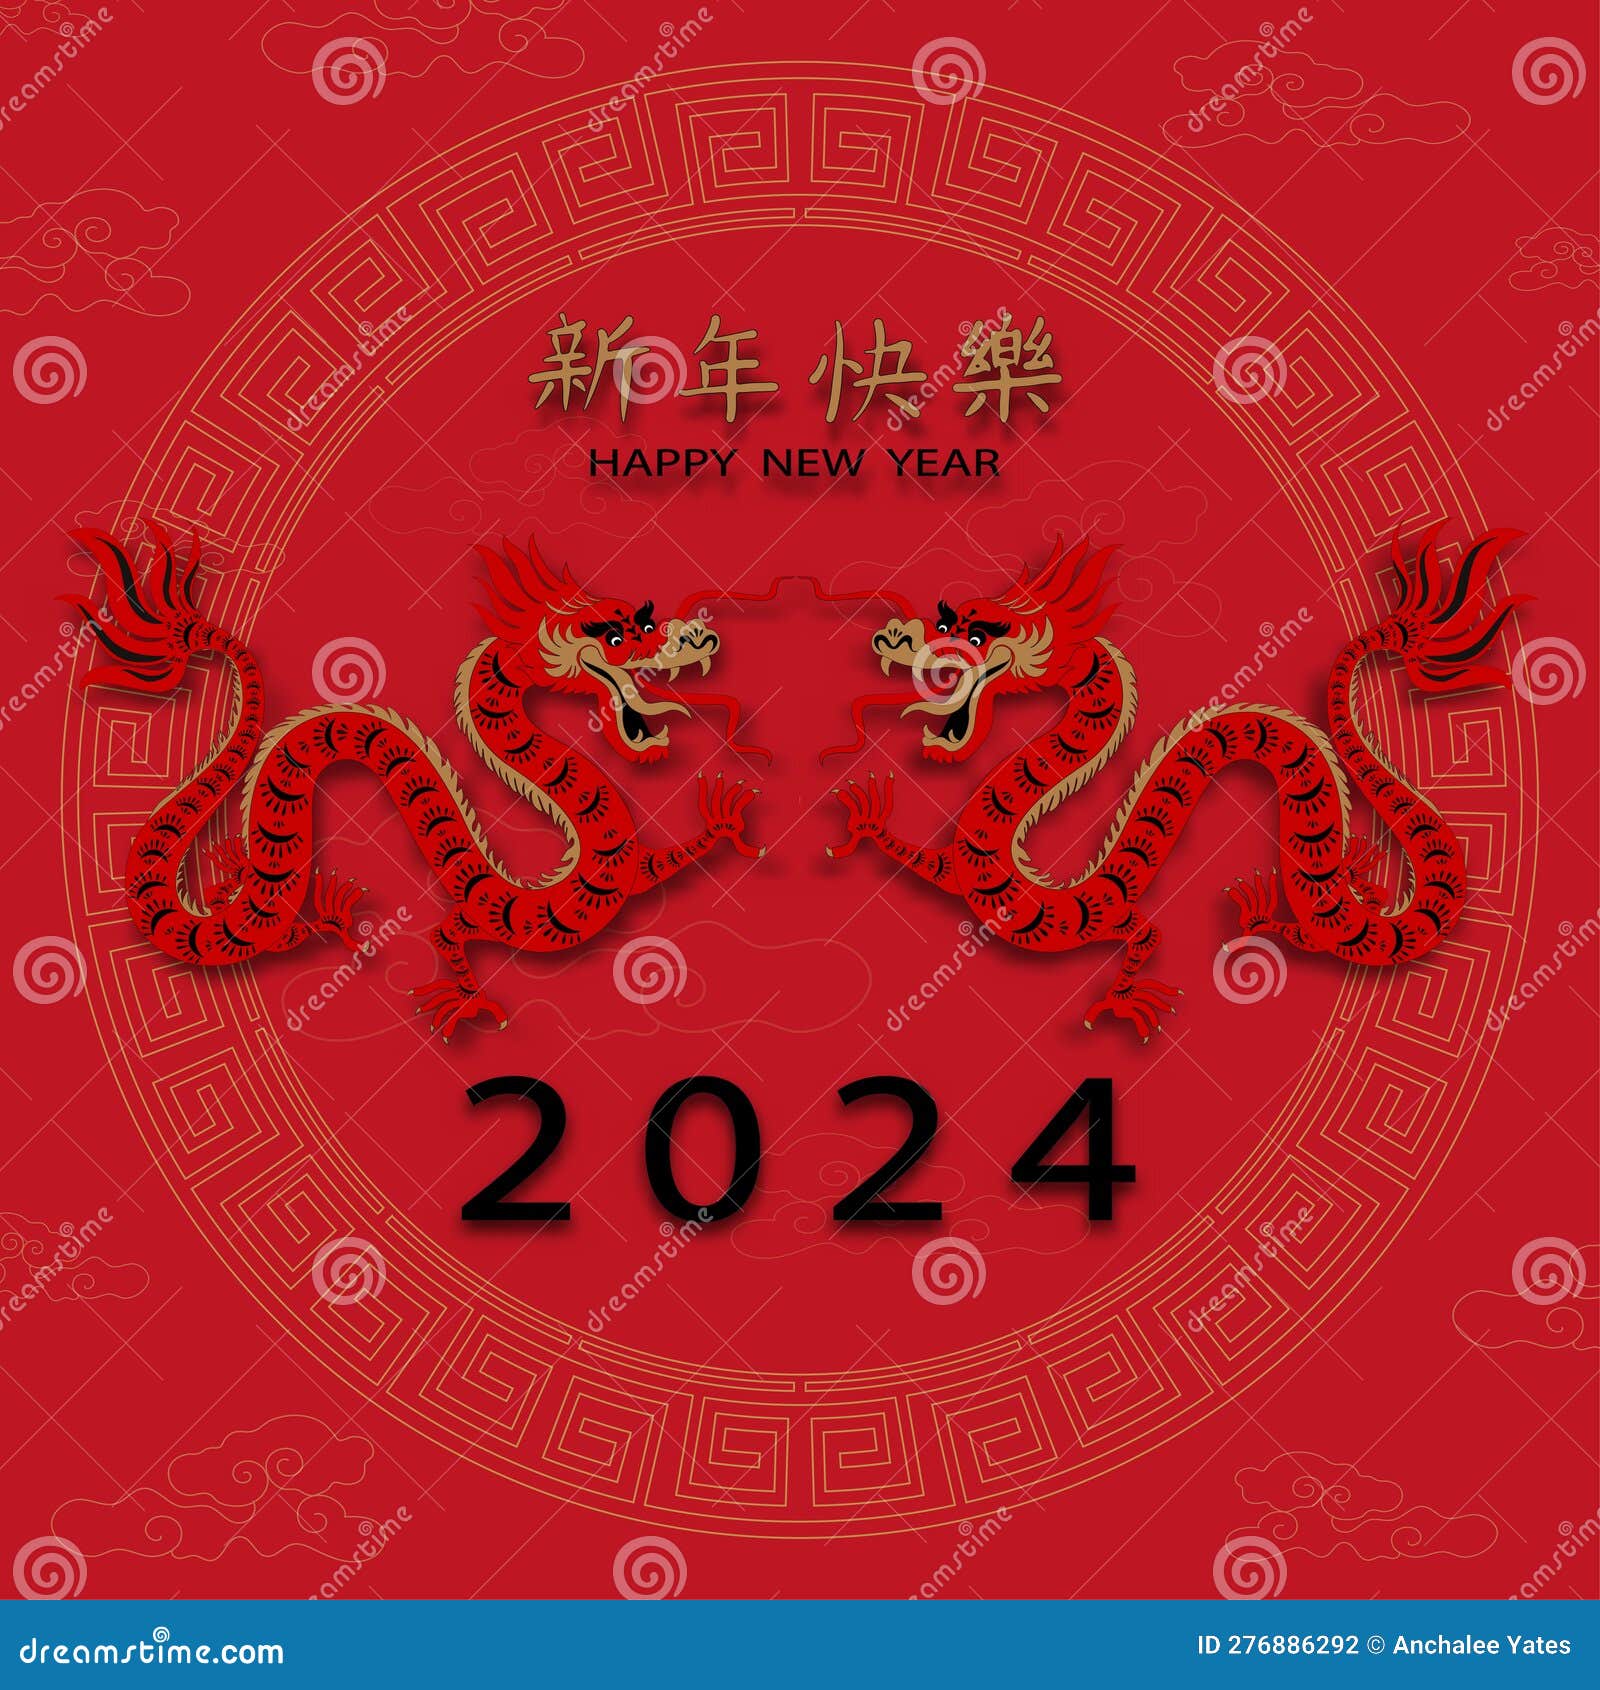 Lunar/chinese New Year 2024 Year of the Dragon Red Envelope 